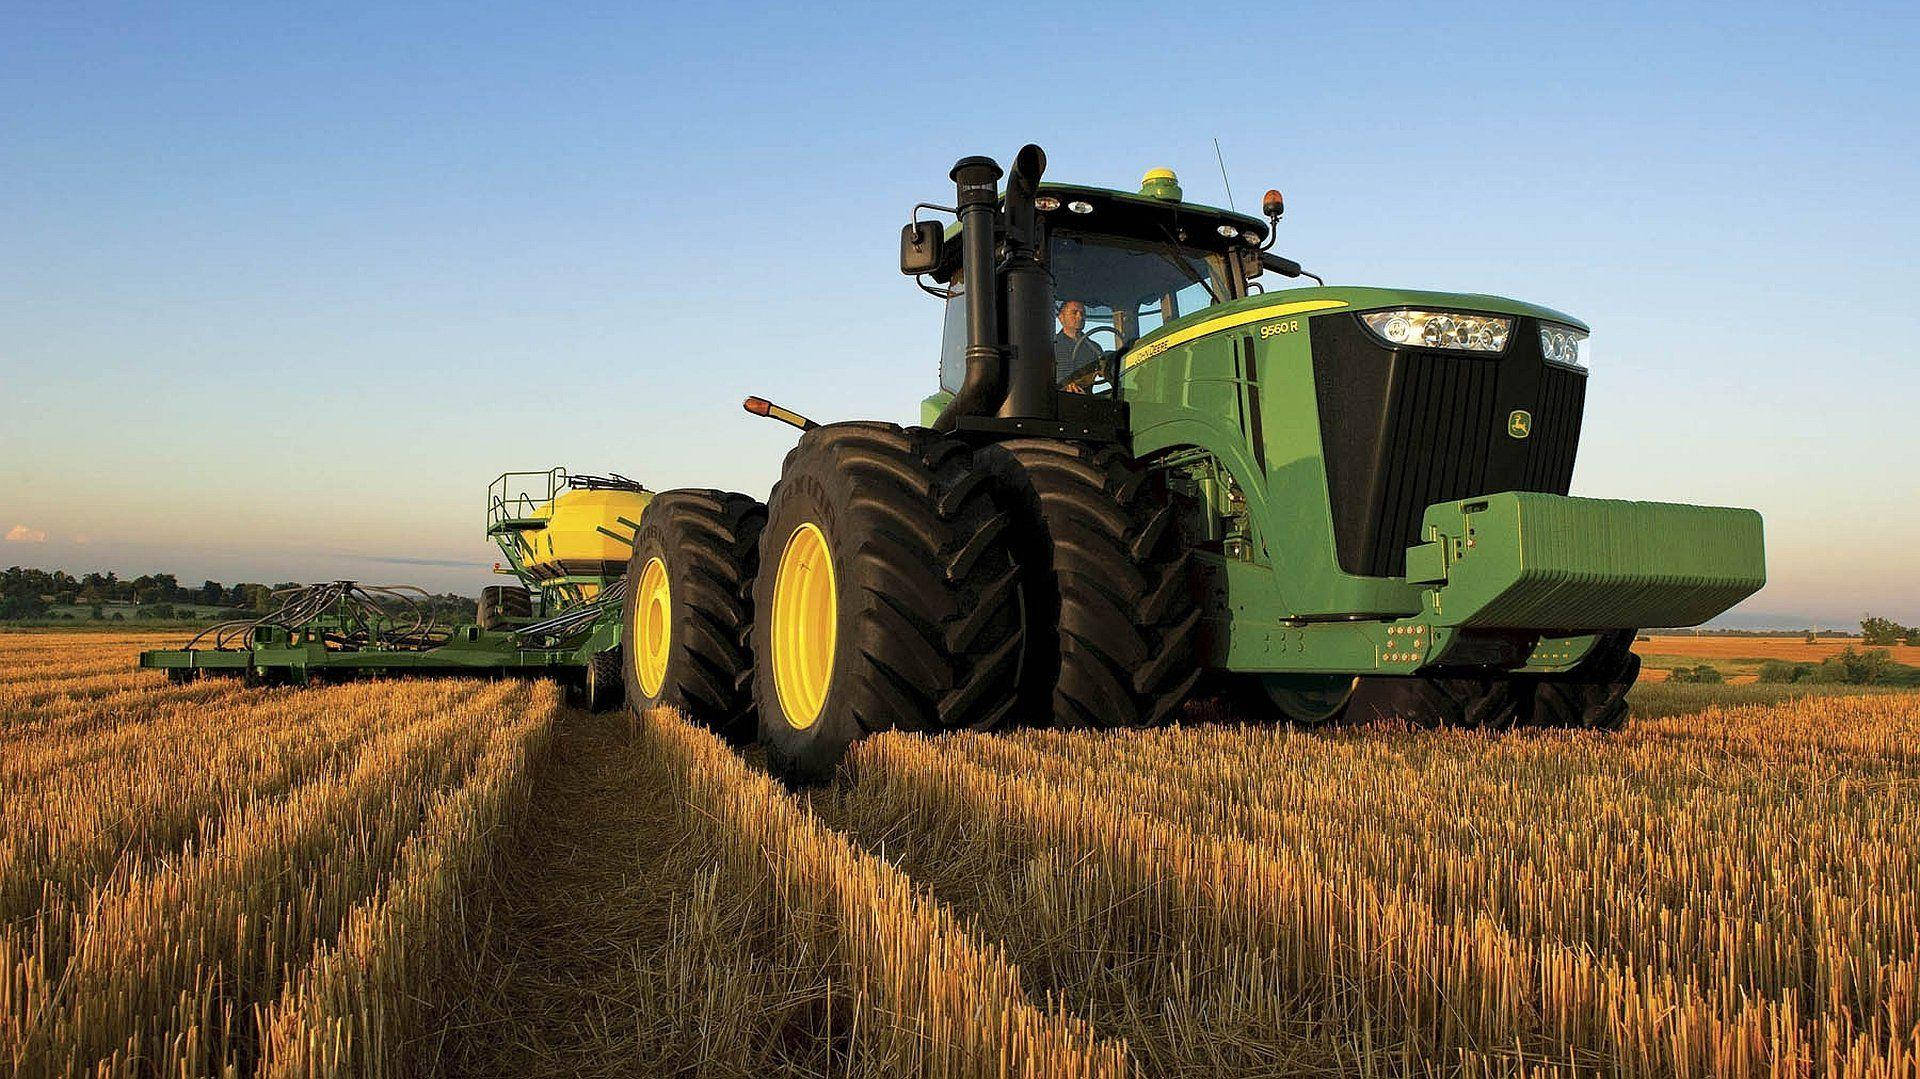 Caption: A pristine John Deere 9R Series Tractor standing tall in a grand landscape. Wallpaper